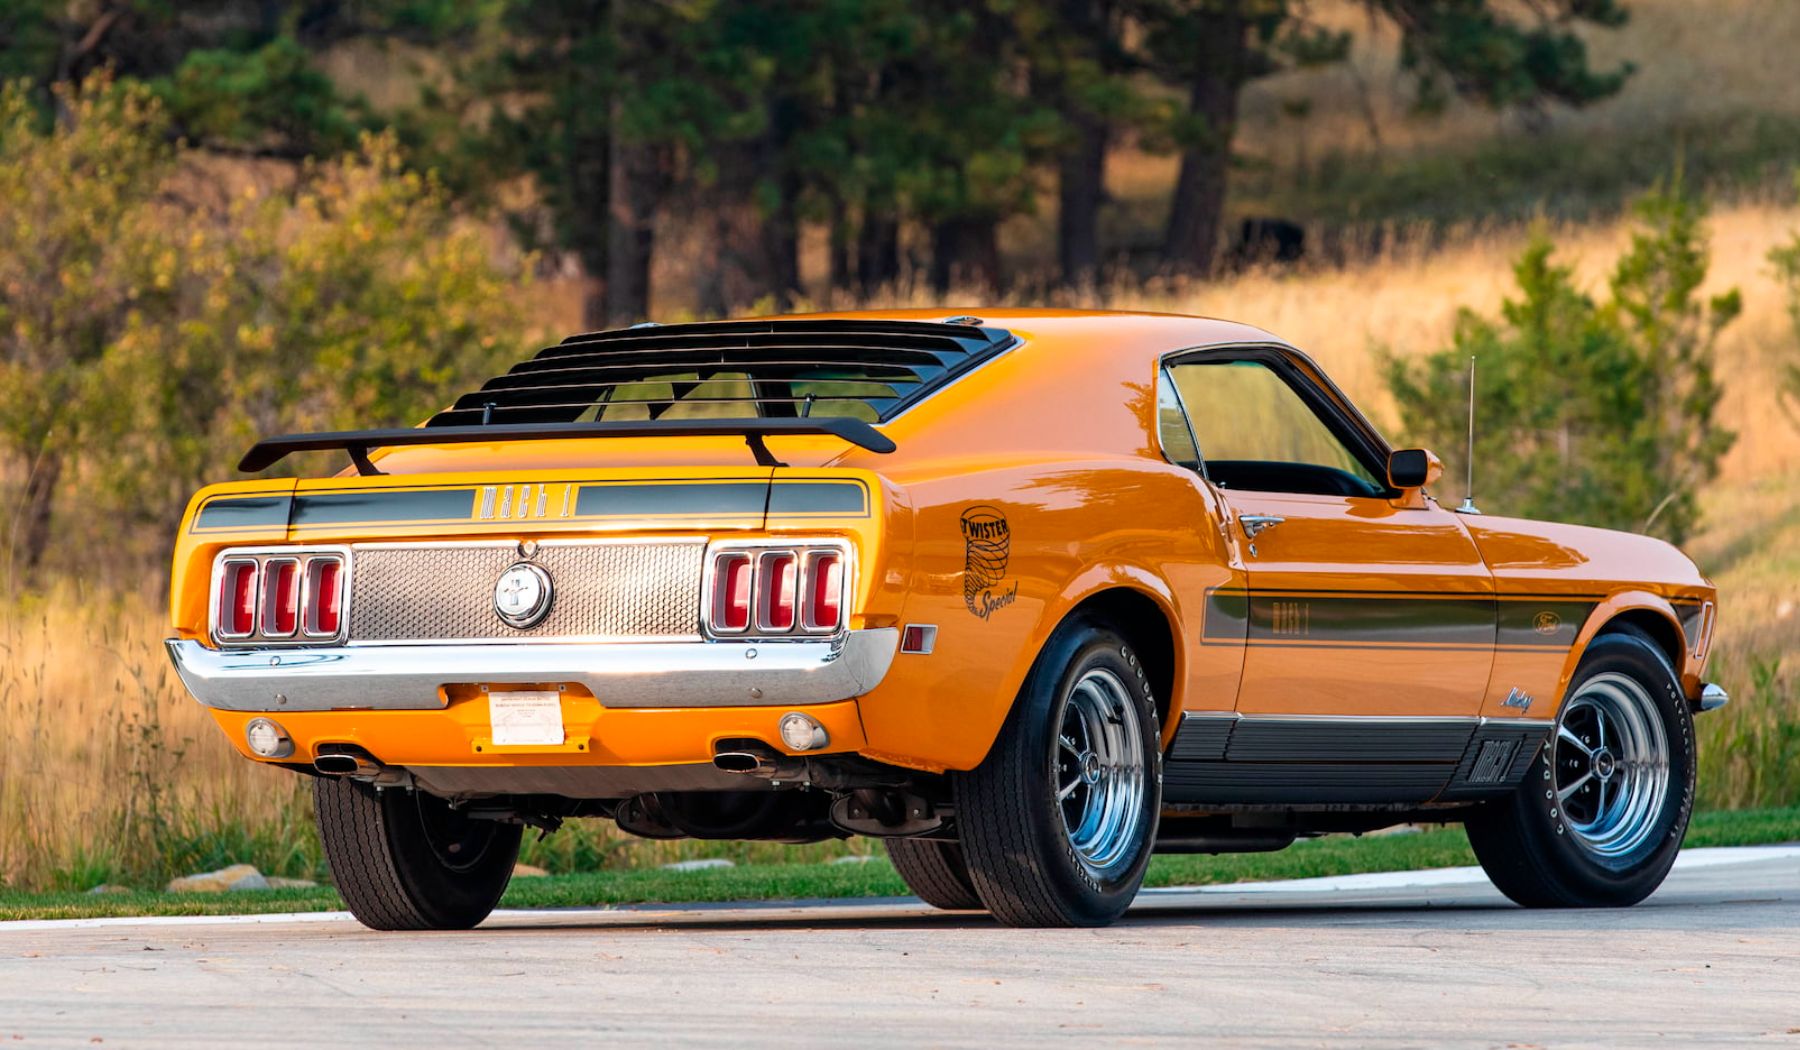 Mach 1 Twister Special: The Story of a Rare, Popular, and Highly Sought ...